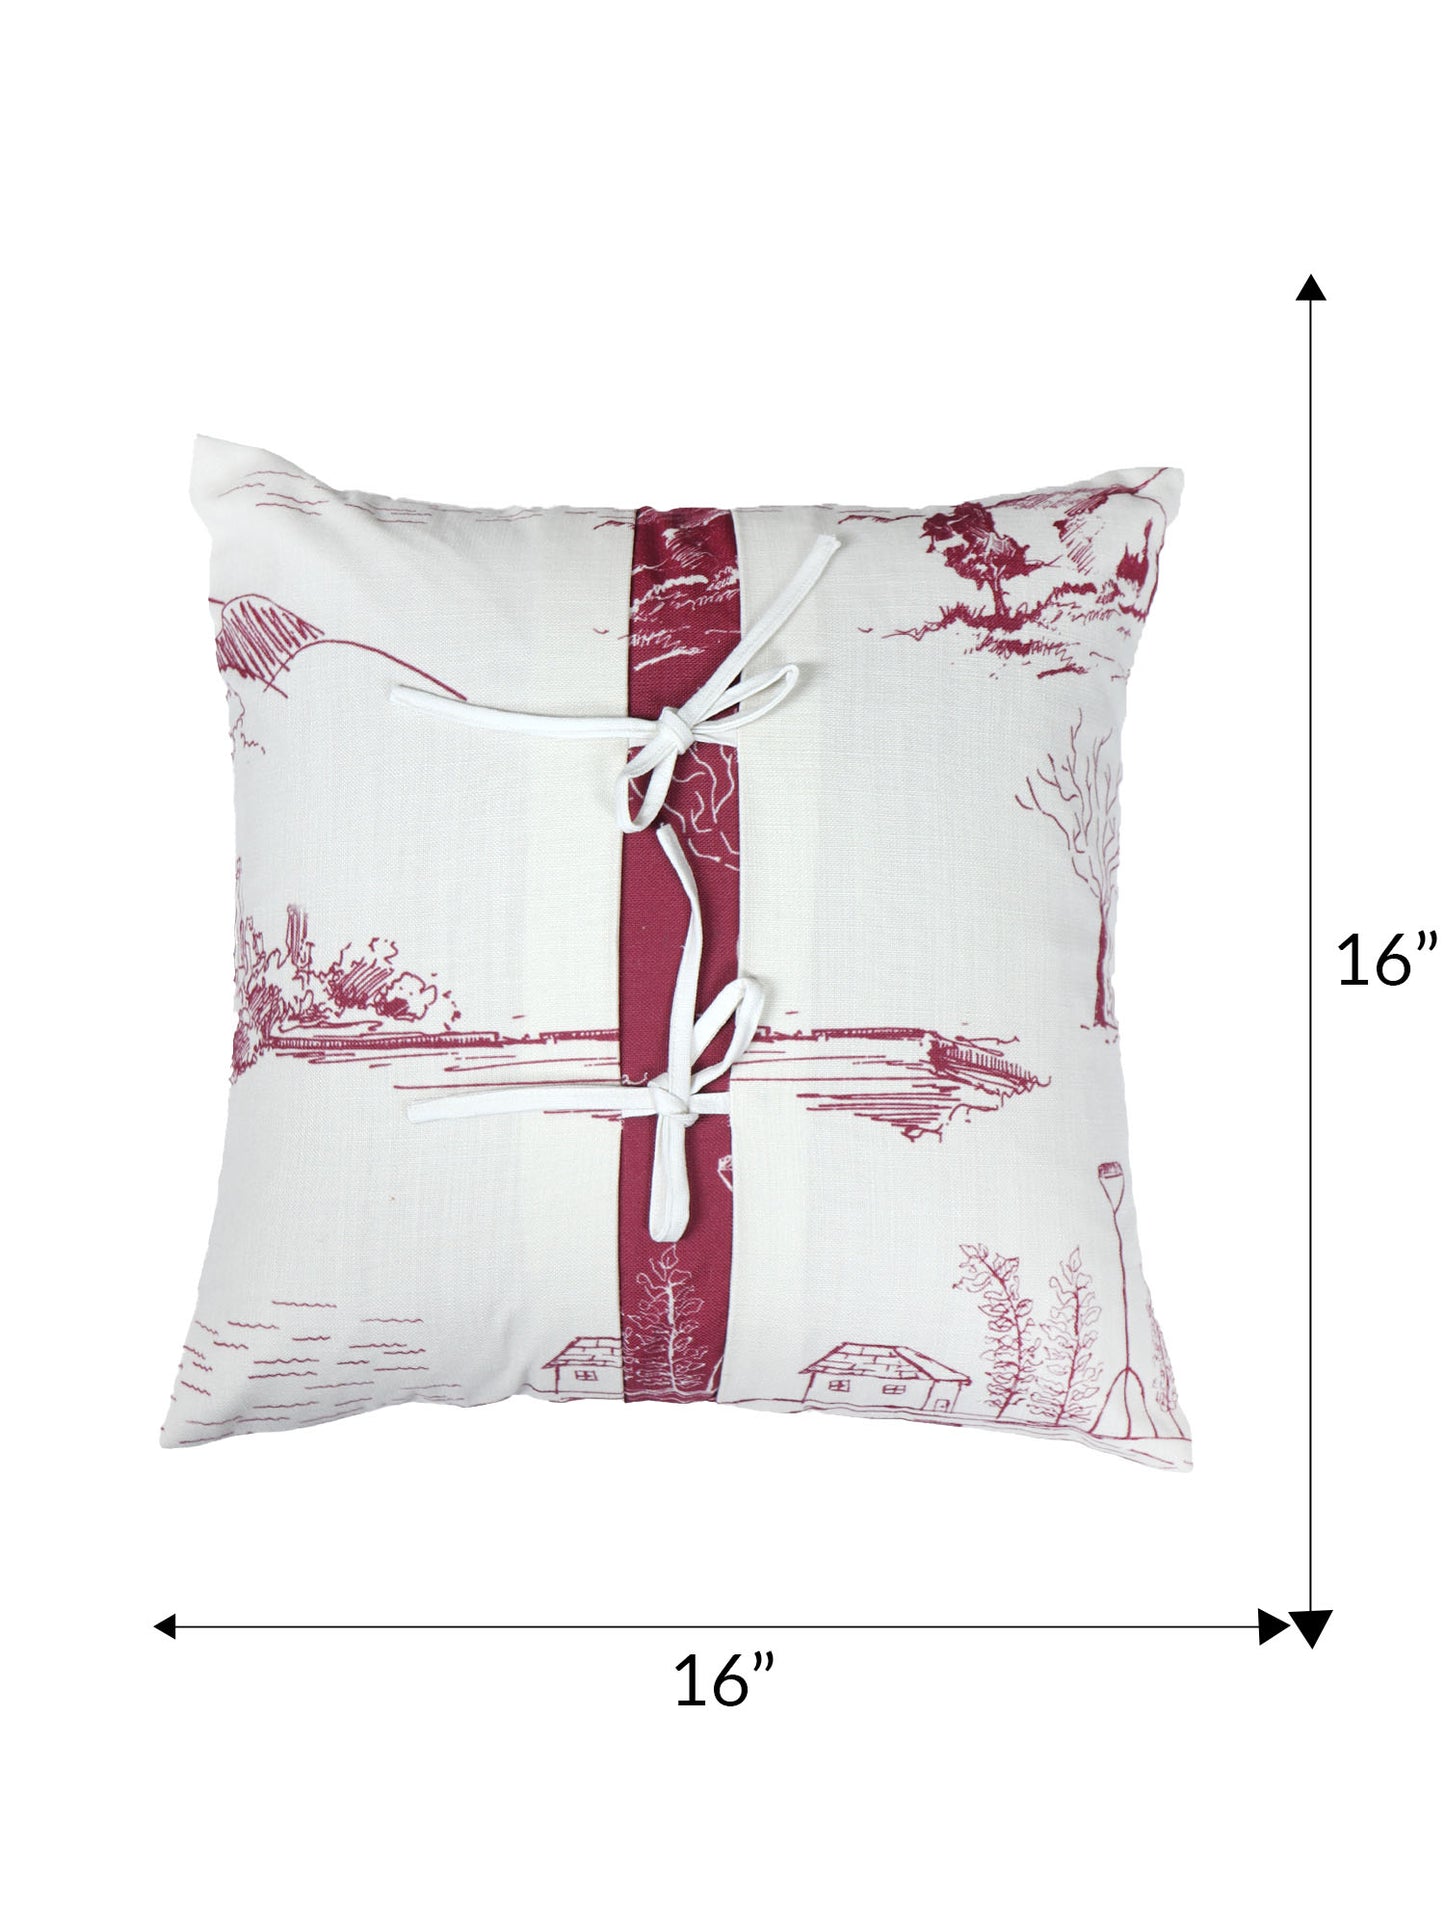 Cushion Cover - Luxe Collection | Sofa, Bedroom, Couch | Polycanvas Floral Printed with Overlapping Patch and Dori - Maroon on White - 16x16 inch (40x40 cms) (Pack of 1)